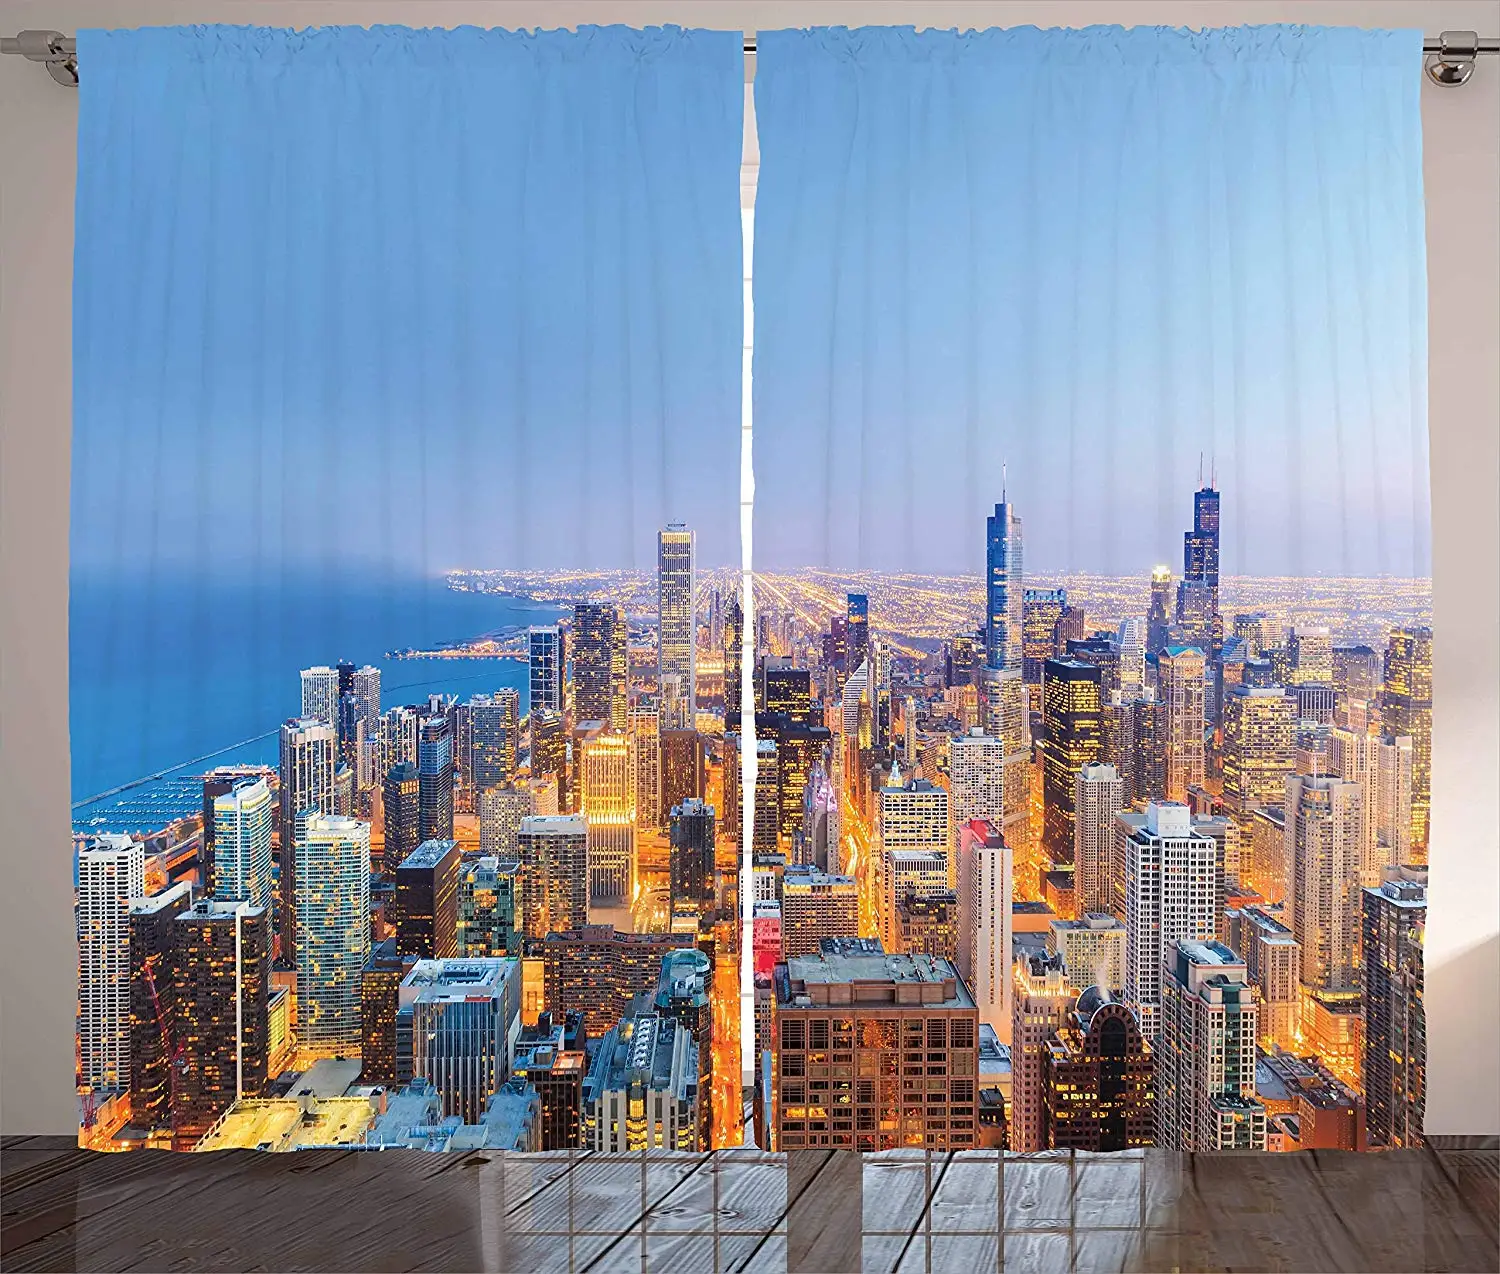 

Chicago Skyline Blackout Curtains Aerial View of Town Michigan Lake Vibrant City Panorama Evening Time Living Room Window Drapes